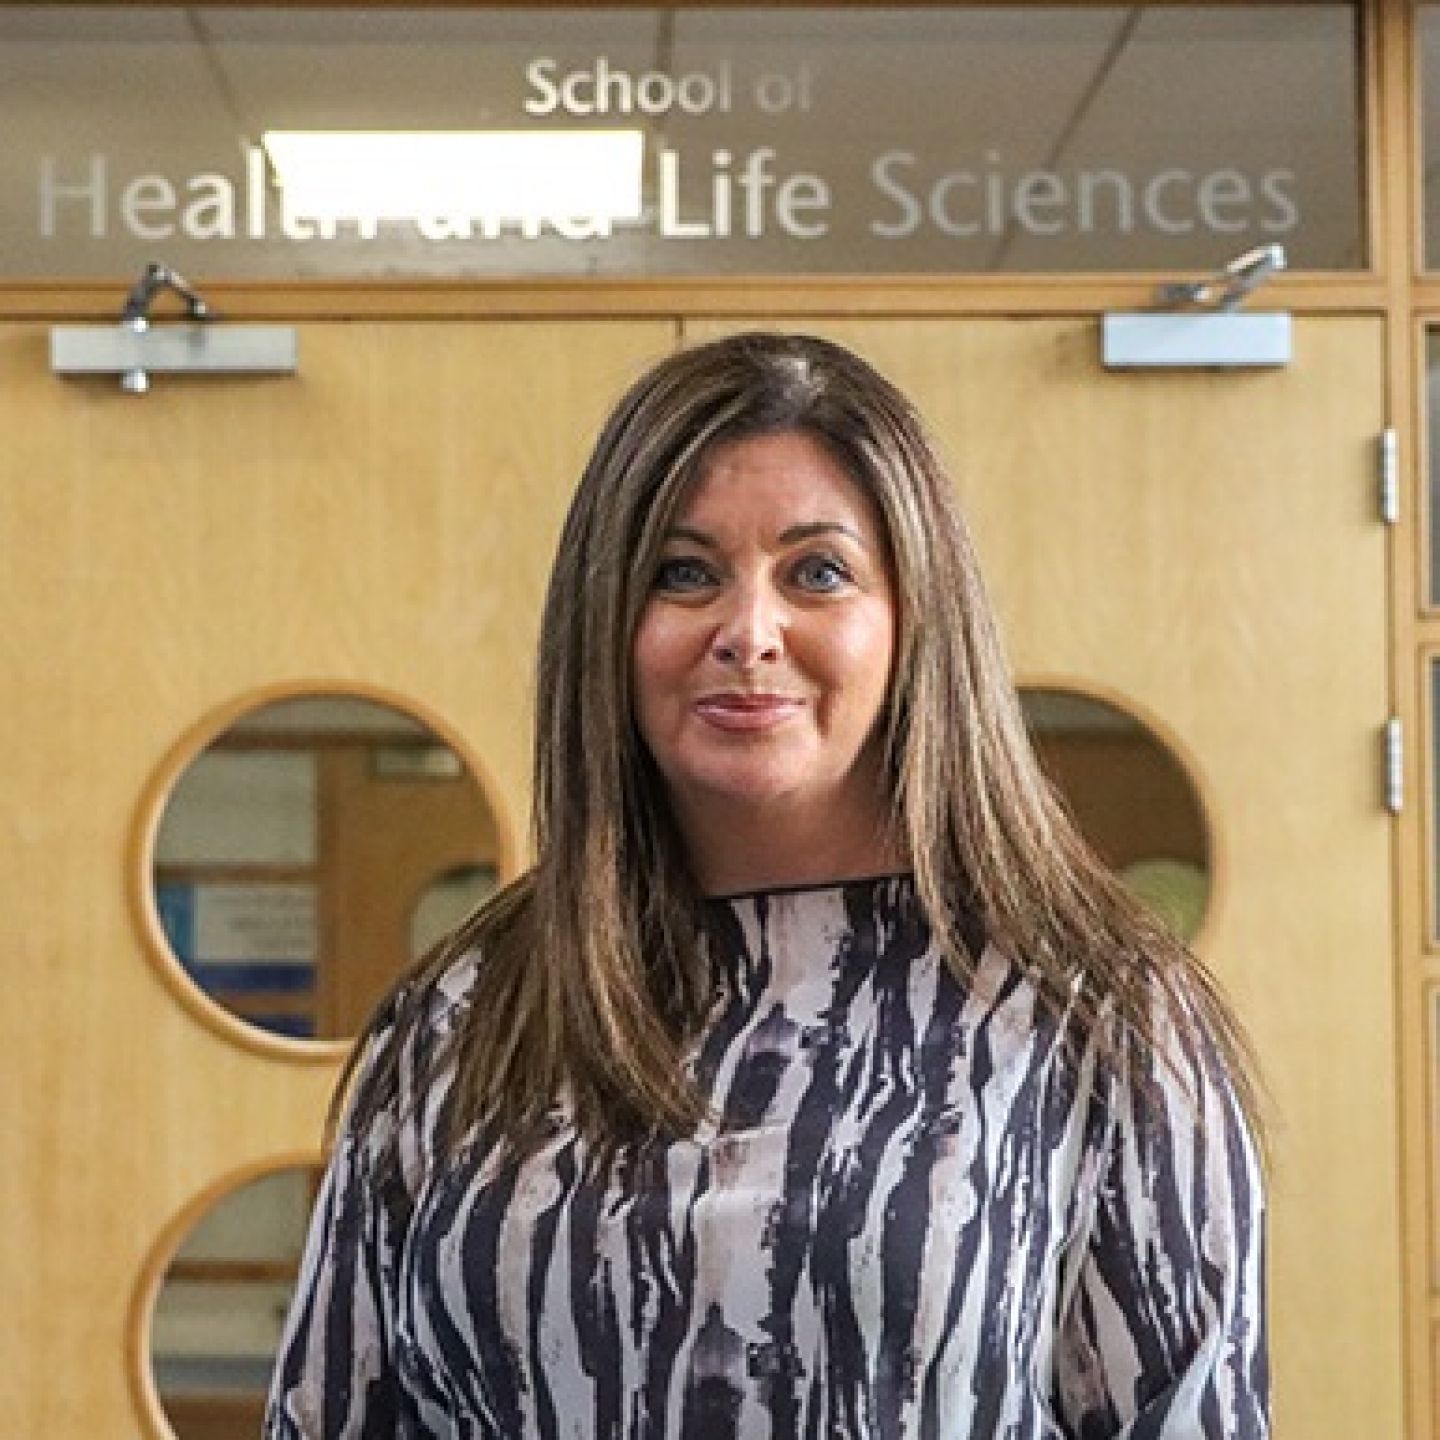 A square photo of Deborah Clark, GCU alumna and Radiography graduate, in front of the School of Health and Life Sciences on Glasgow campus.